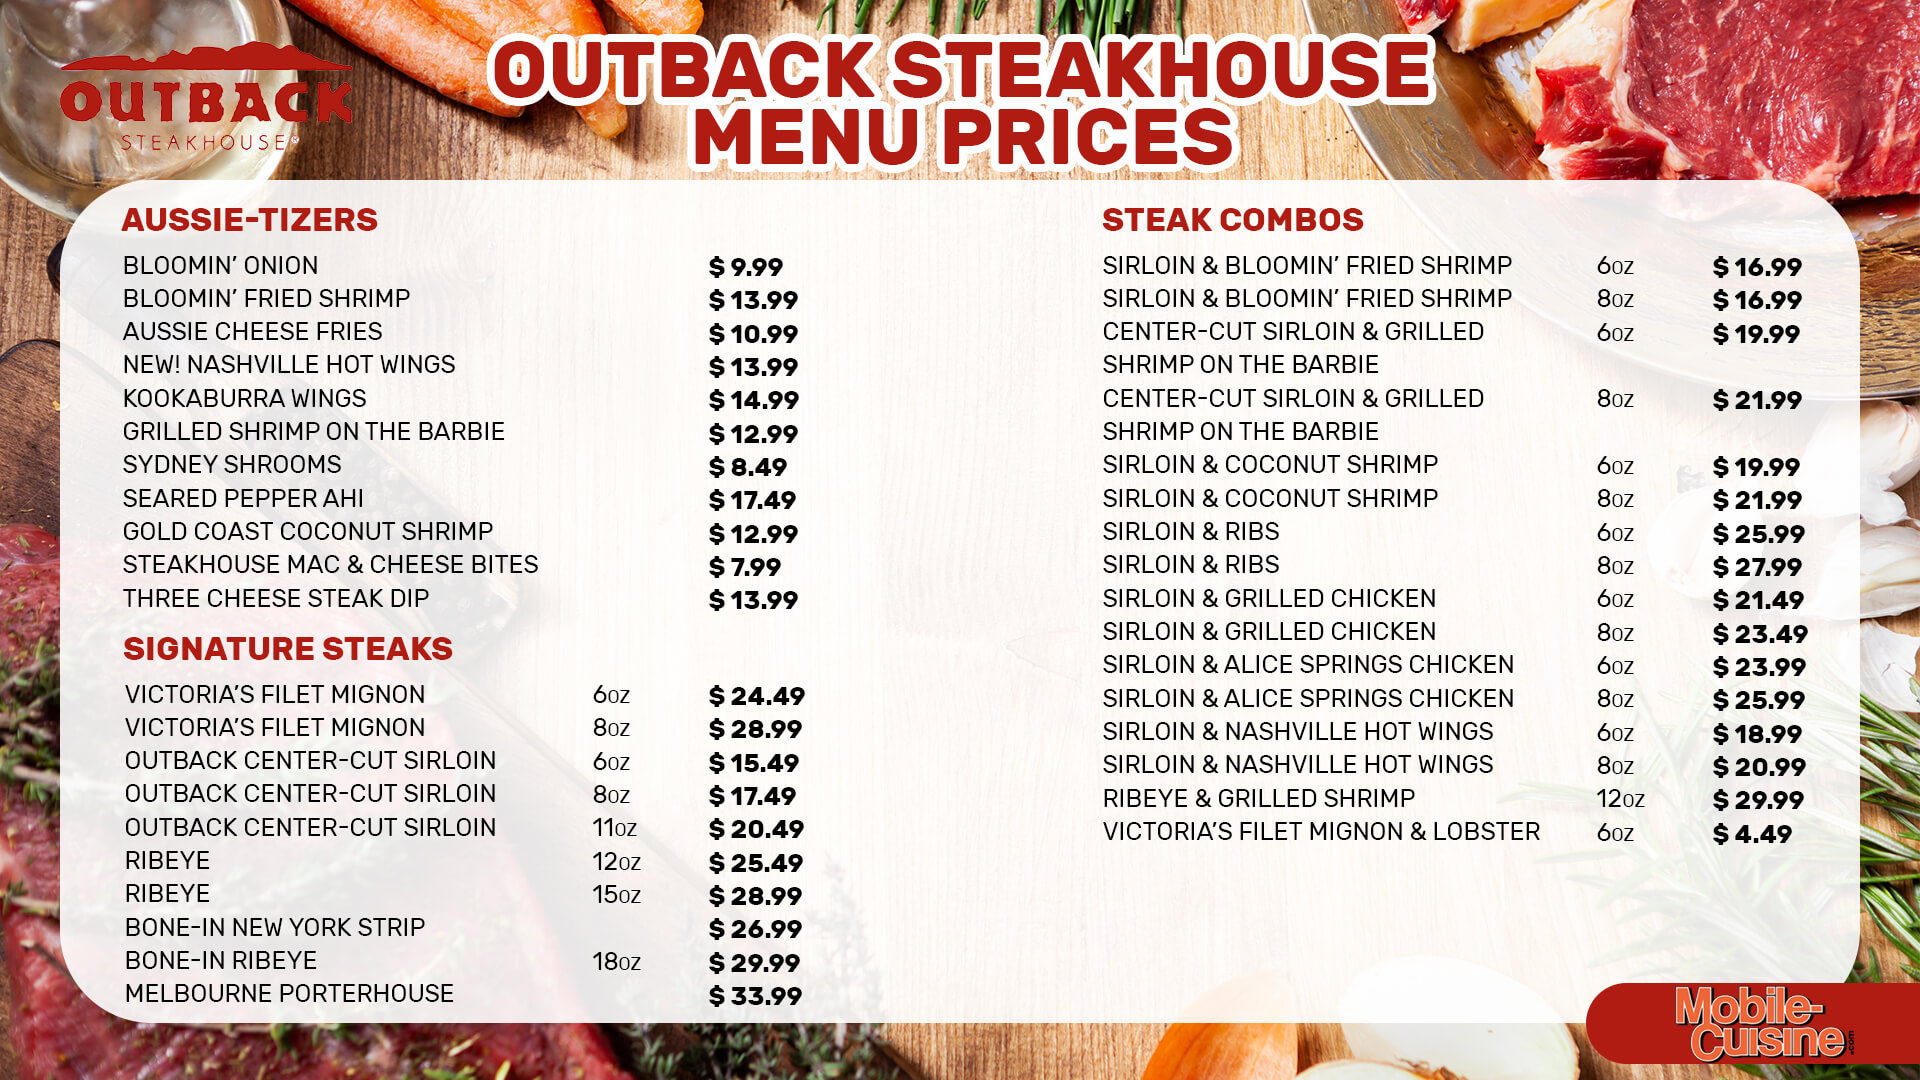 Outback Steakhouse menu prices